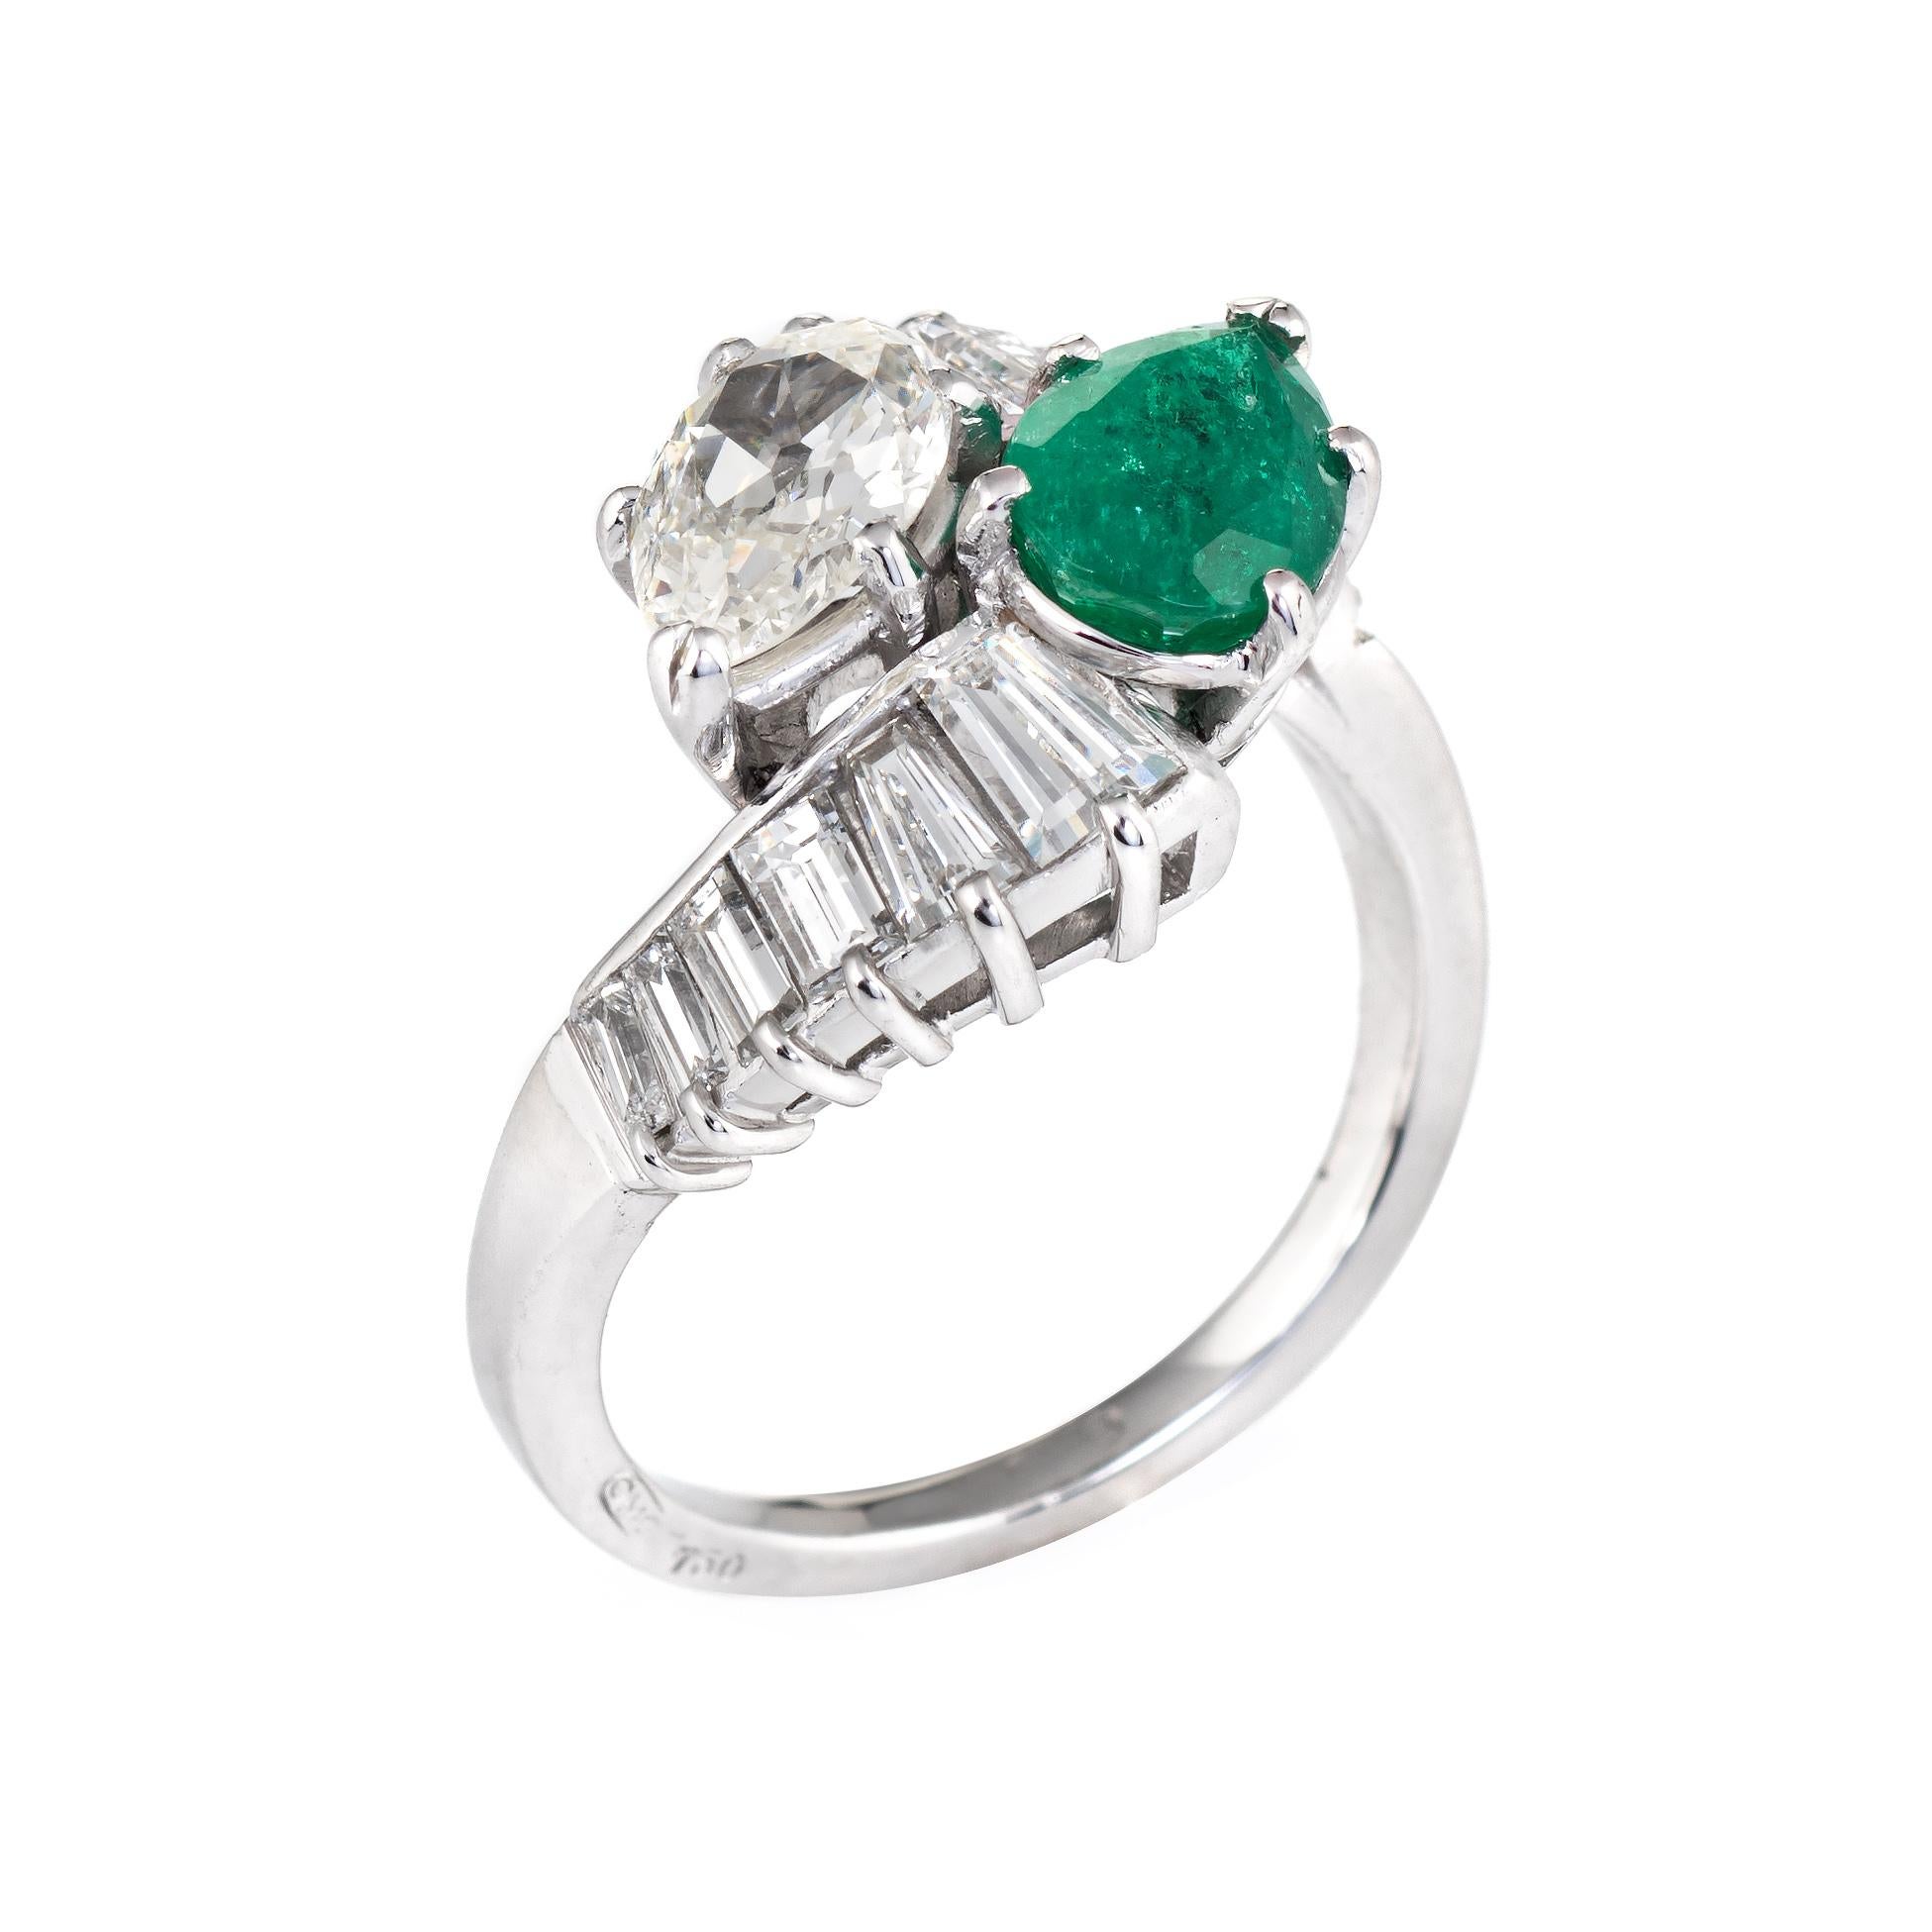 Elegant vintage emerald & diamond bypass ring (circa 1950s to 1960s) crafted in 18 karat white gold. 

Centrally mounted old pear cut diamond measures 7.5mm x 5.5mm (estimated at 1 carat). The diamond is estimated at J-K color and VS2-SI1 clarity.